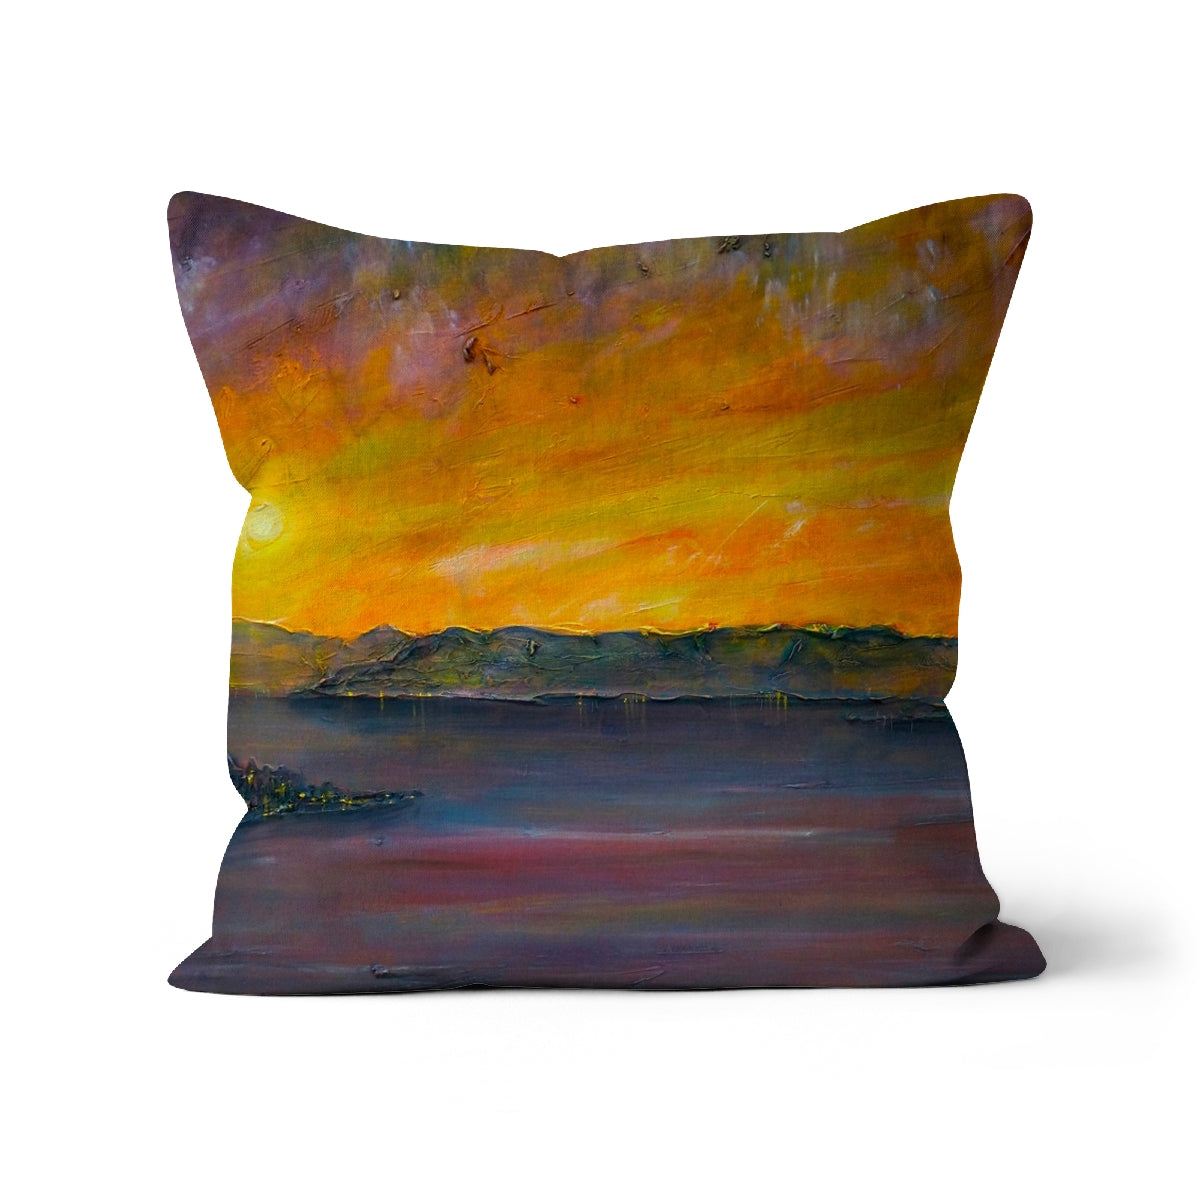 Sunset Over Gourock Art Gifts Cushion-Cushions-River Clyde Art Gallery-Canvas-12"x12"-Paintings, Prints, Homeware, Art Gifts From Scotland By Scottish Artist Kevin Hunter